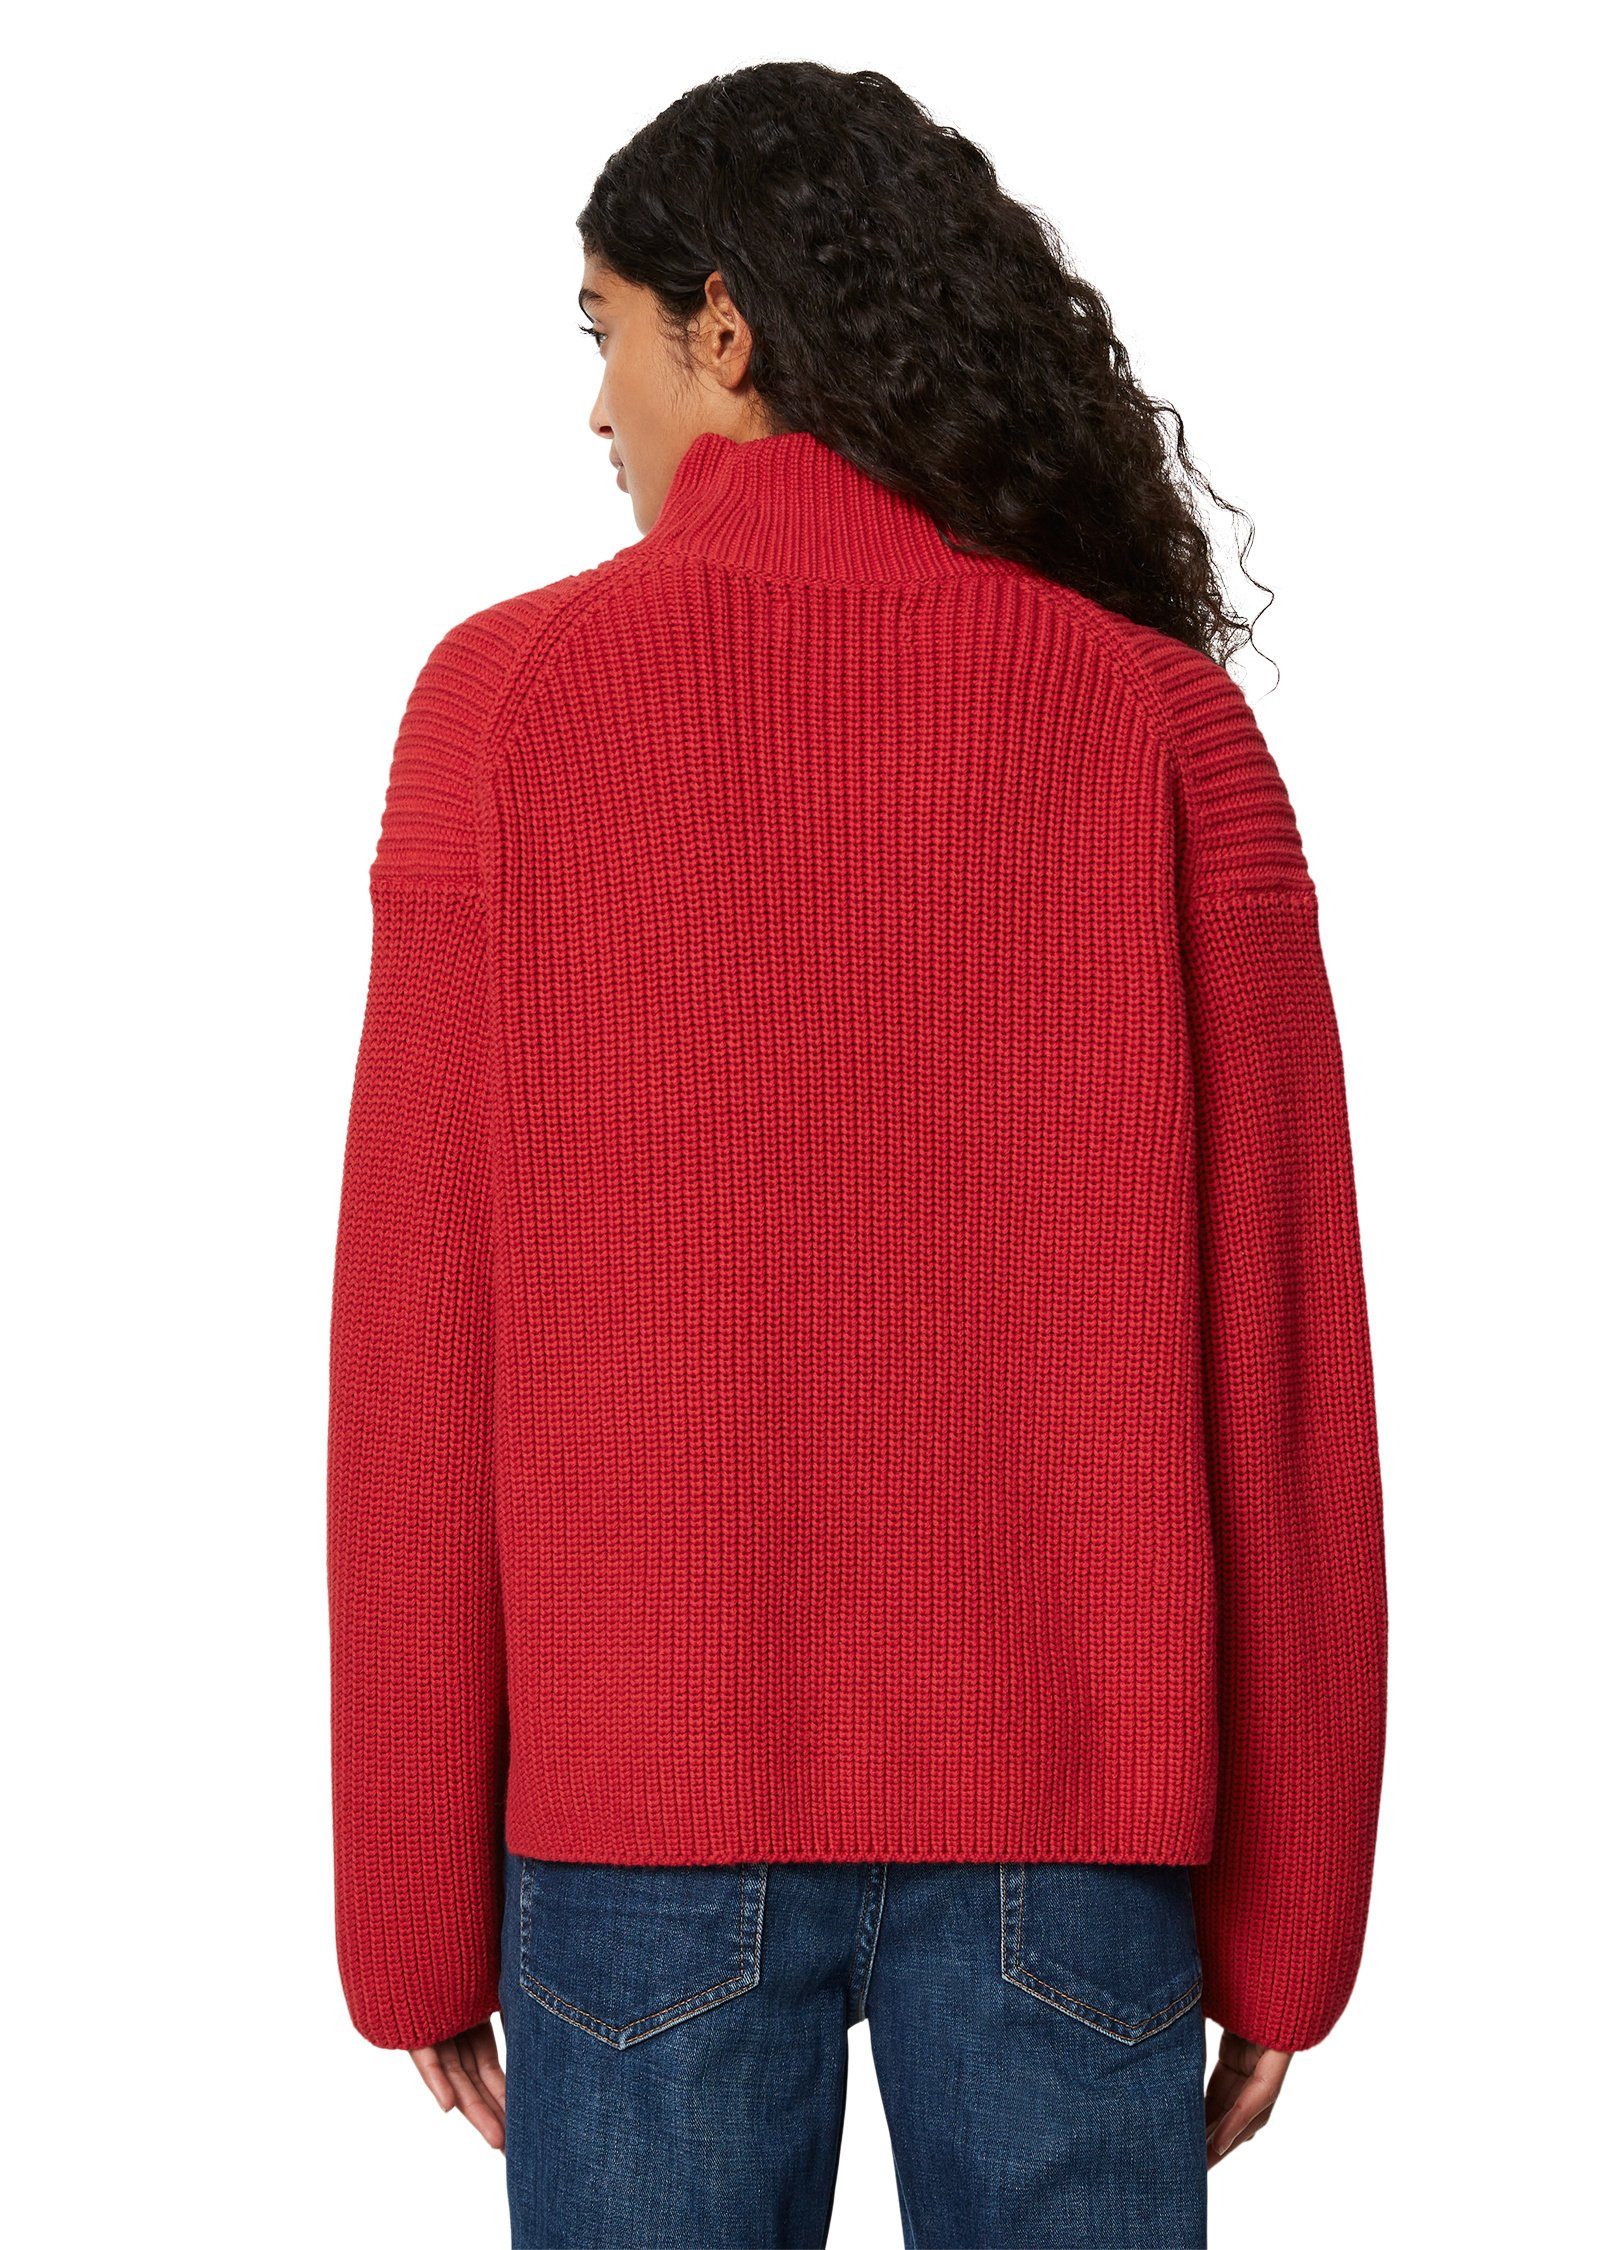 O'Polo aus Heavy Strickpullover Weight rot Cotton Marc